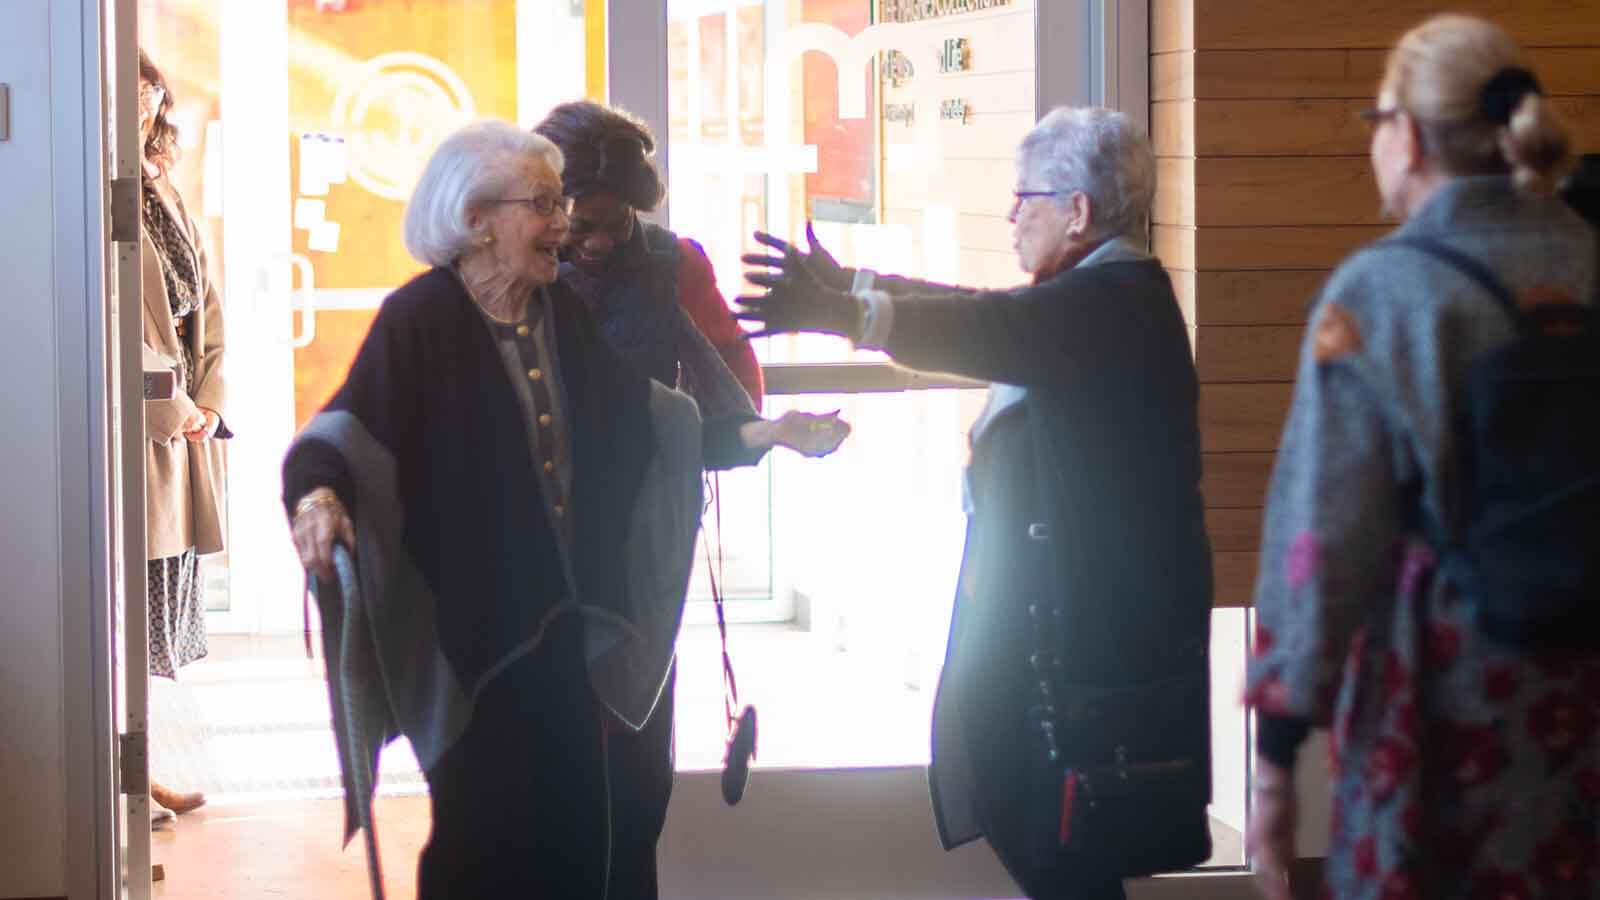 Women greeting each out at the entrance of the museum